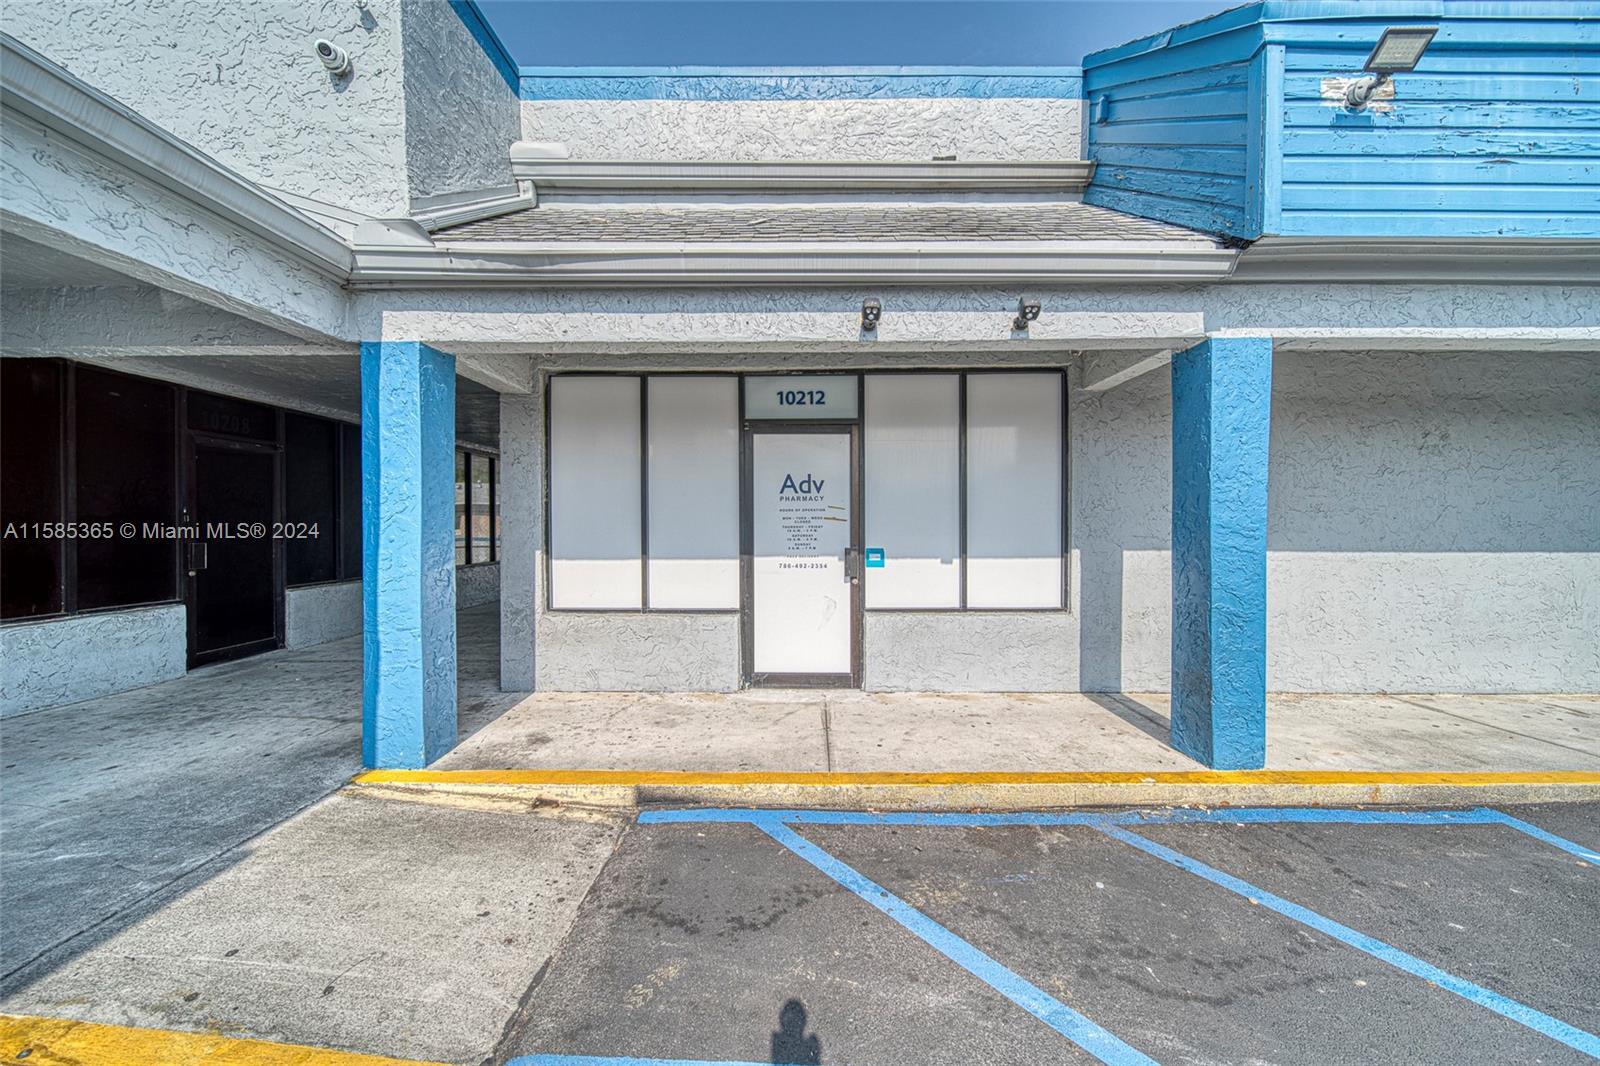 10200 183rd Street 10212, Miami, RETAIL SPACE,  for leased, Sandra Benkahla, The 305 Agency